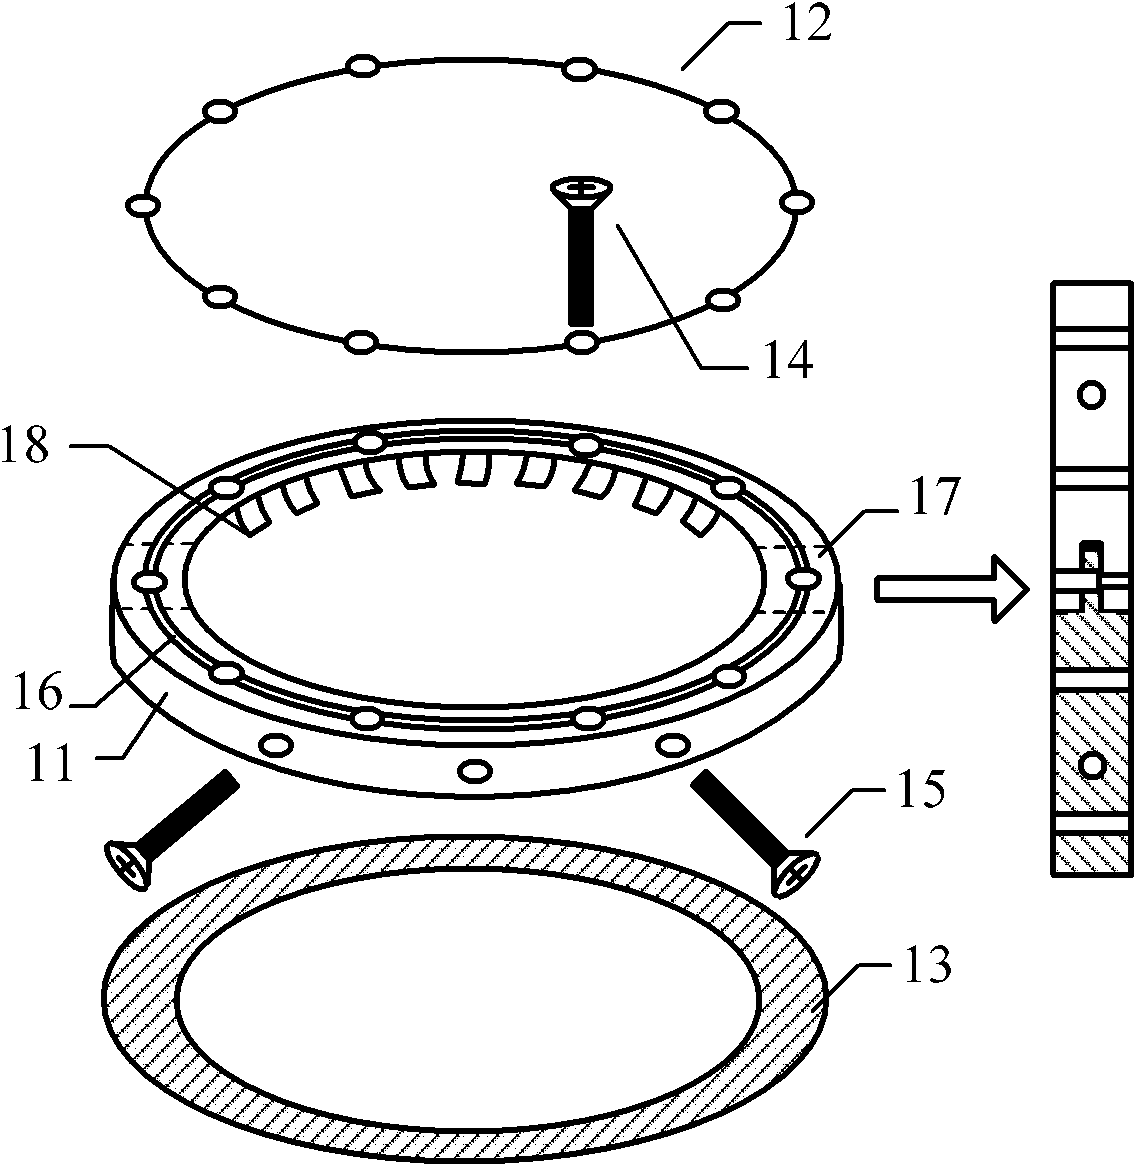 Insulator leakage current collecting ring and insulator leakage current collecting device